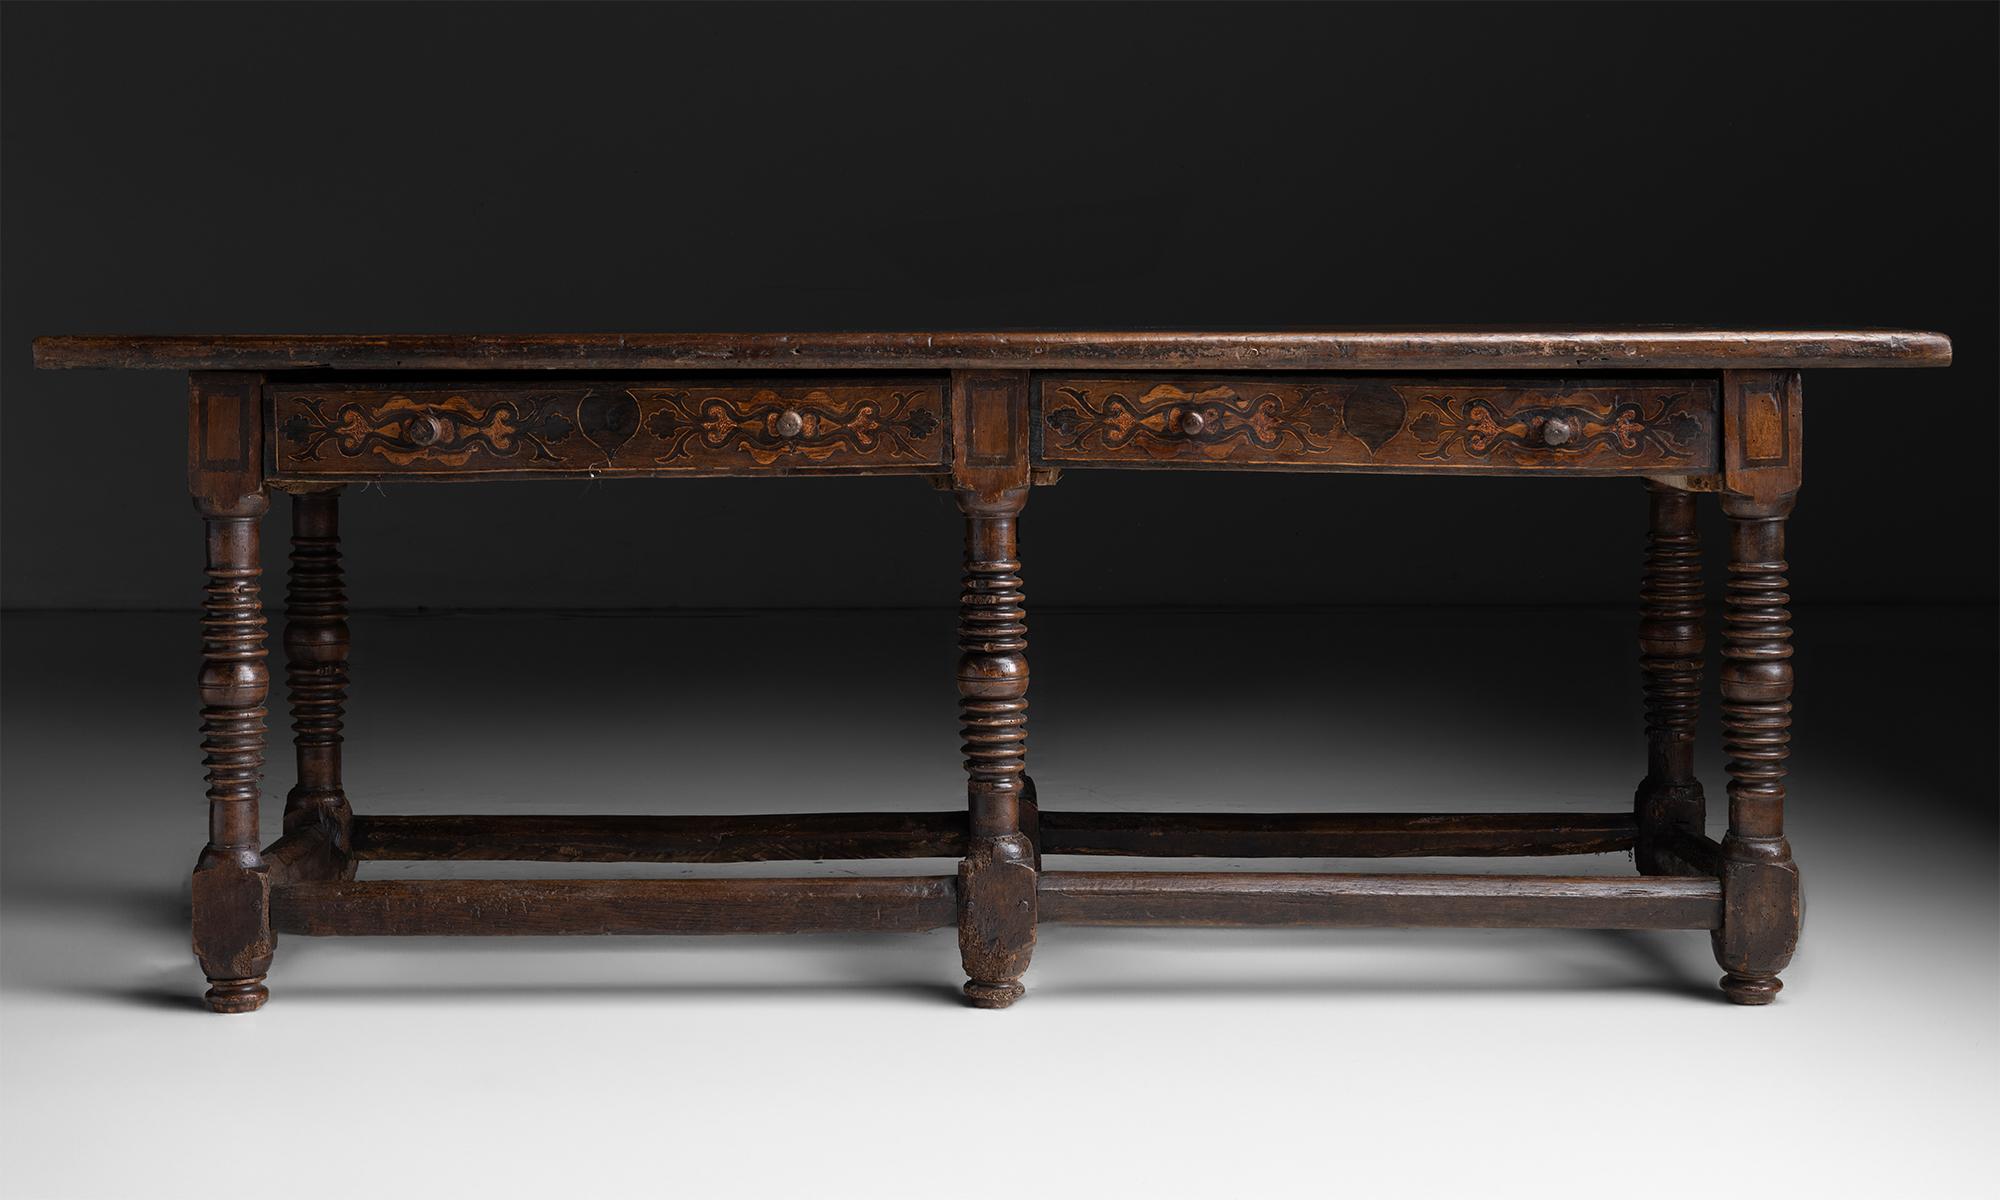 Decorative Console

Italy circa 1700

Unique console with inlay detailing on two front drawers, six turned legs.

84”L x 26.75”d x 30.5”h